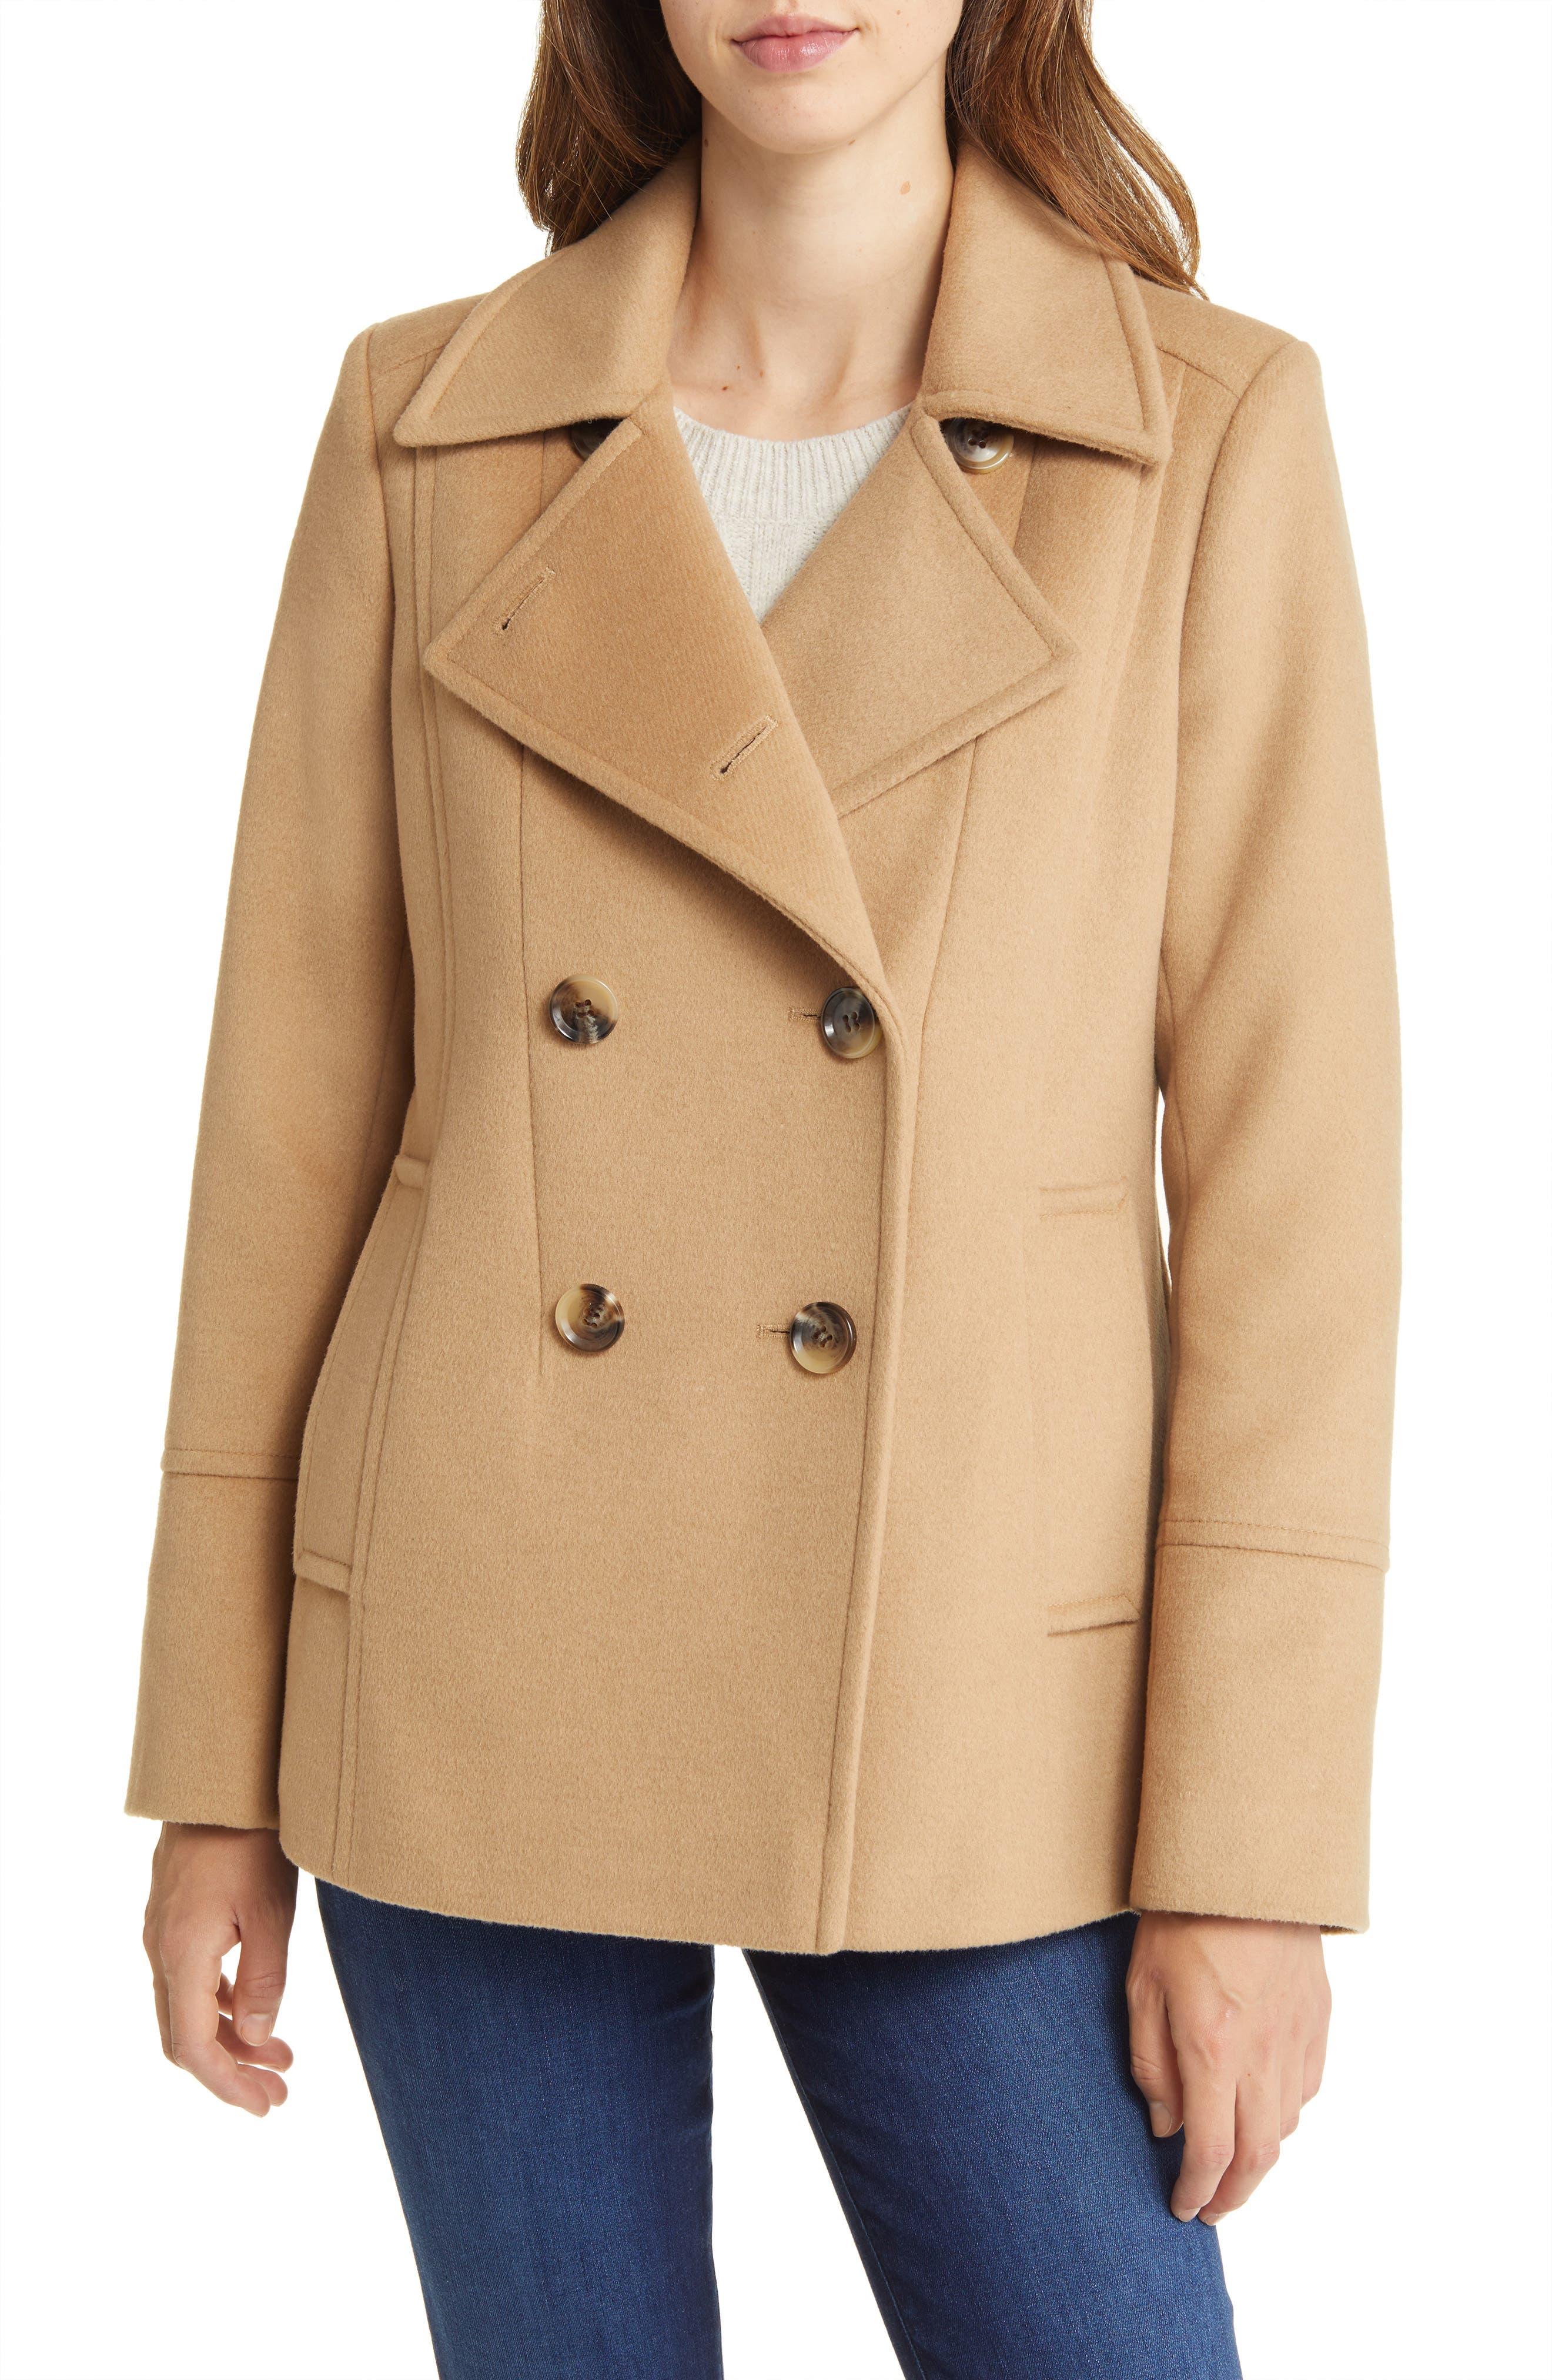 Ti konstruktion slot Sam Edelman Double Breasted Wool Blend Peacoat in Natural | Lyst